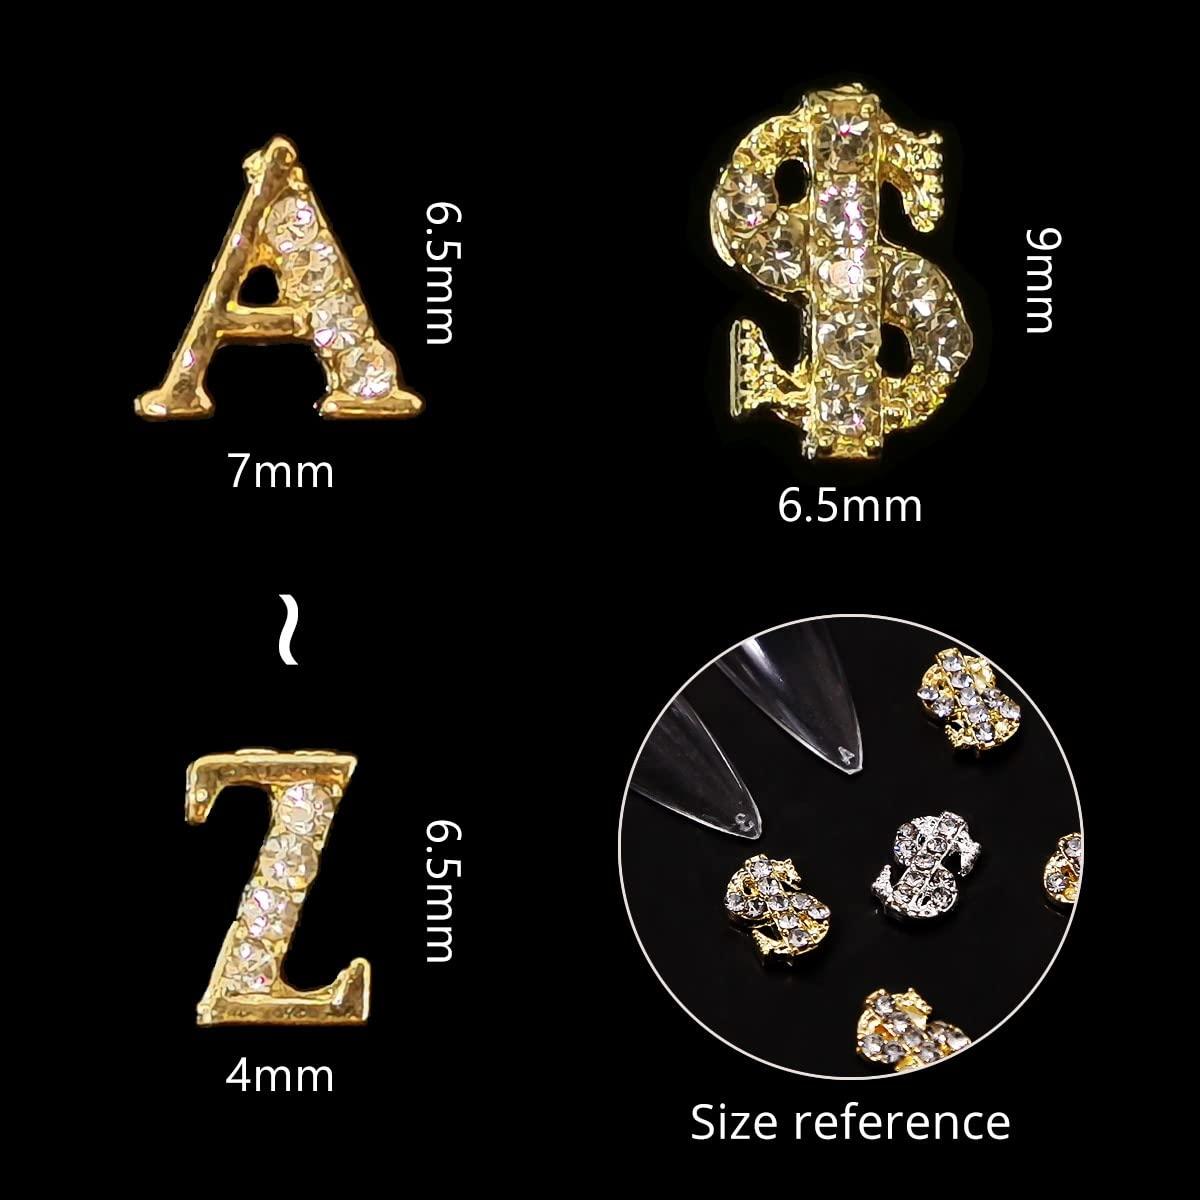 52 Pcs 3D Metal Nail Studs Decoration Glitter Gold Capital English Letters  and Rhinestone Combination Set DIY Designs Supplies for Women